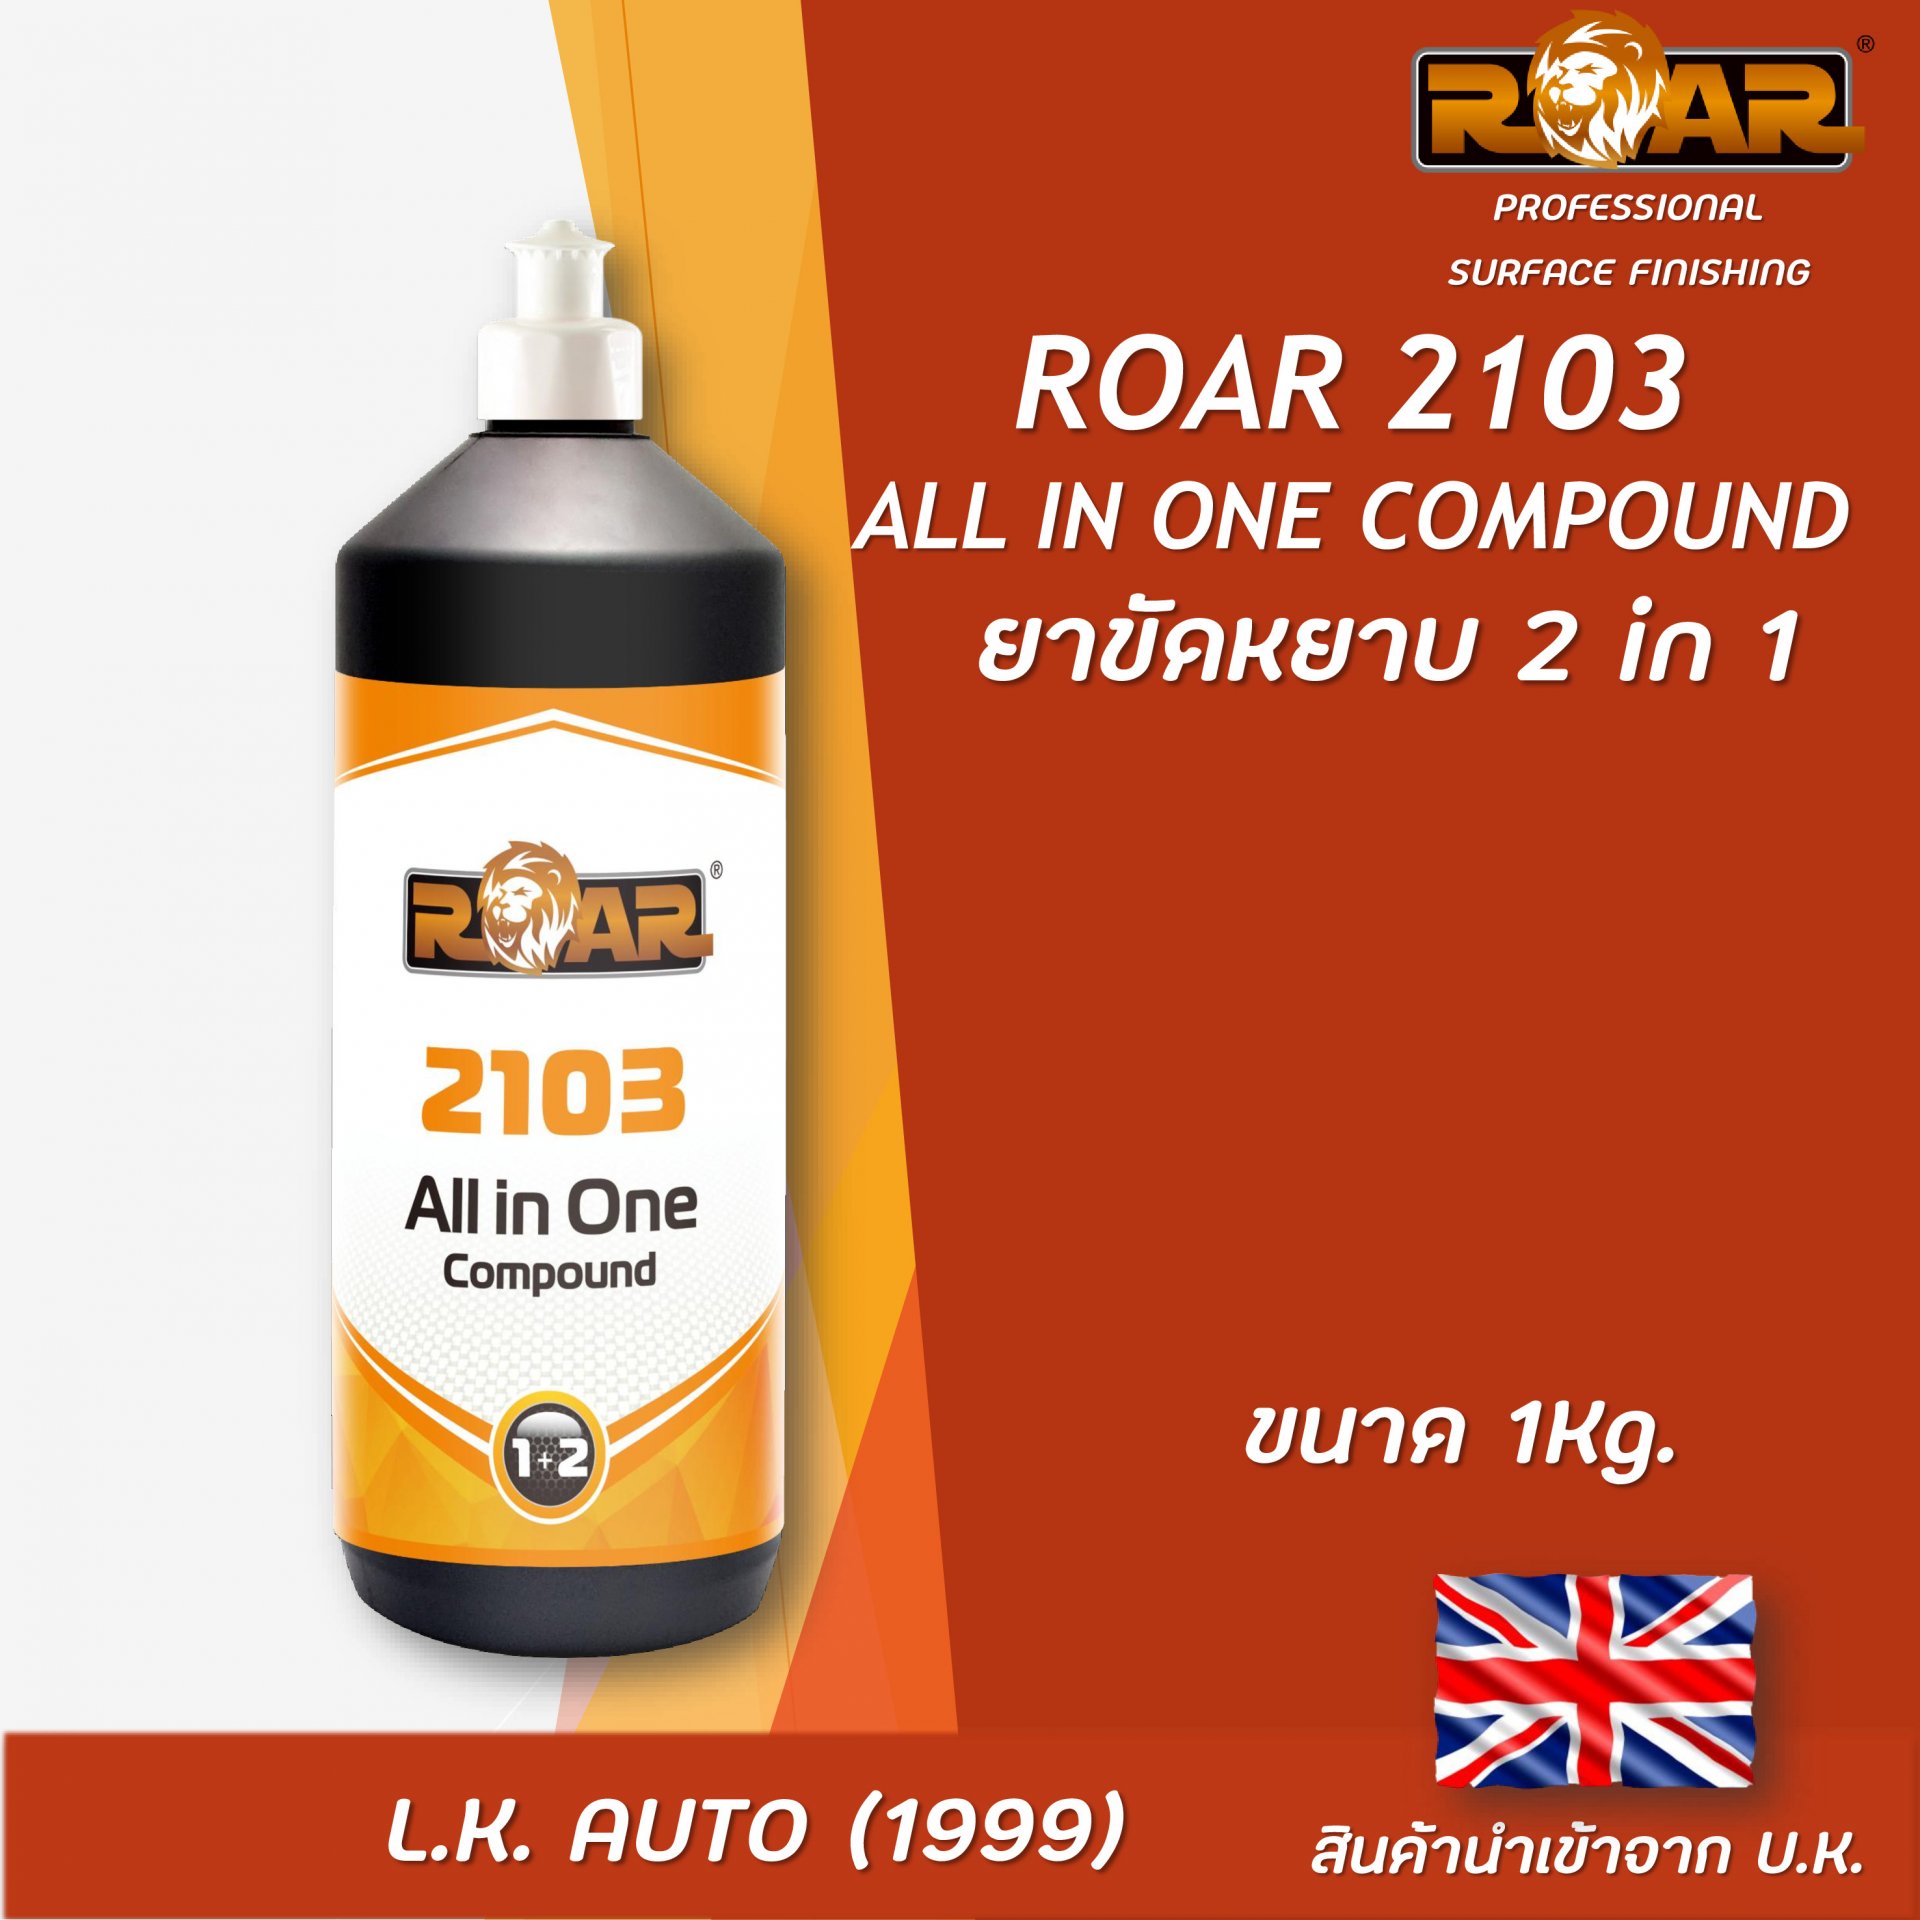 ROAR 2103 ALL in One Compound